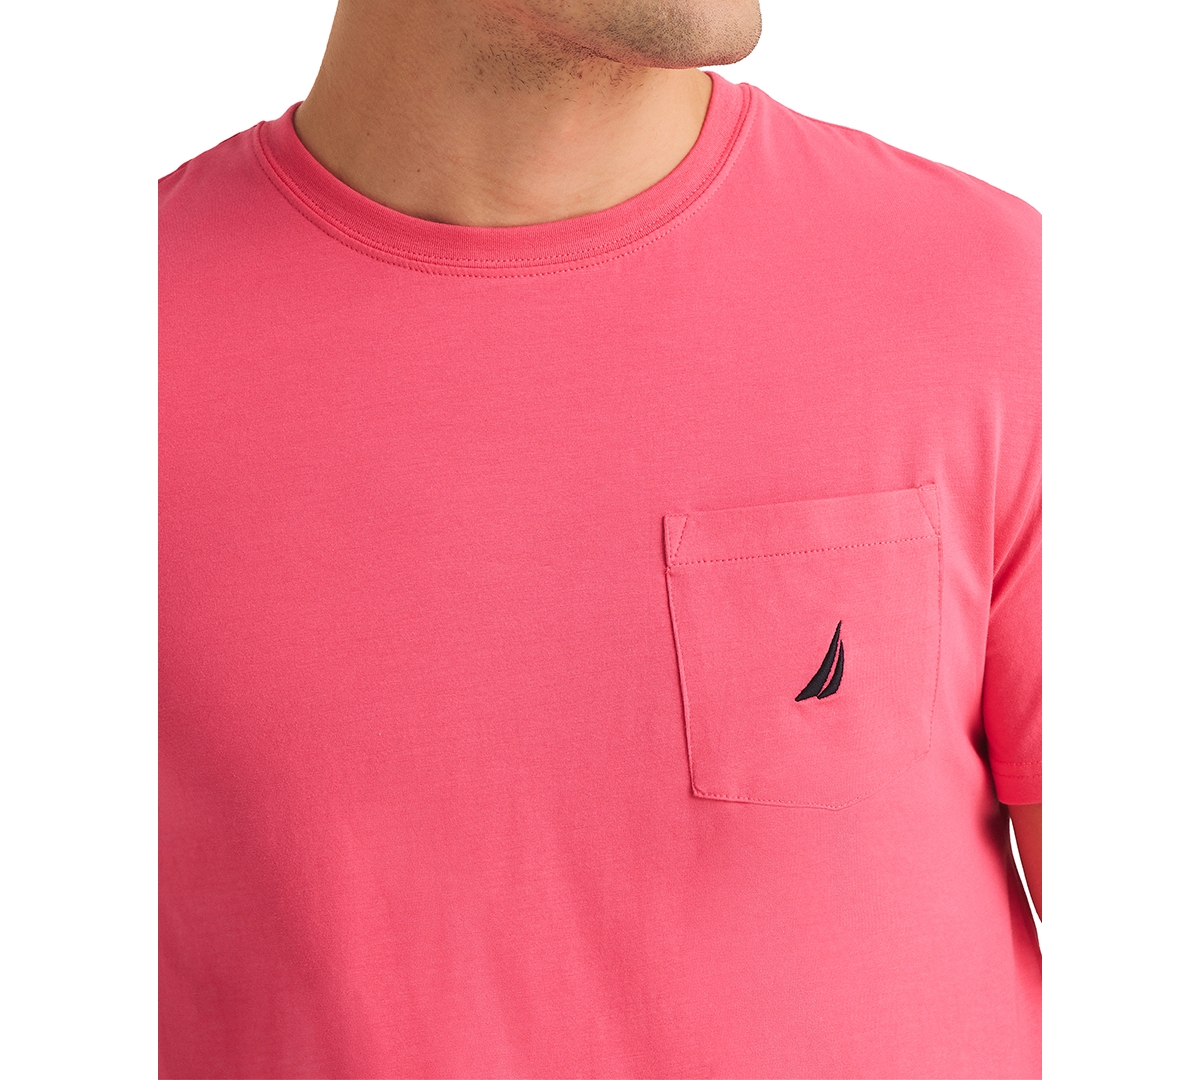 Nautica Men's Classic-fit Solid Crew Neck Pocket T-shirt In Bright Pink